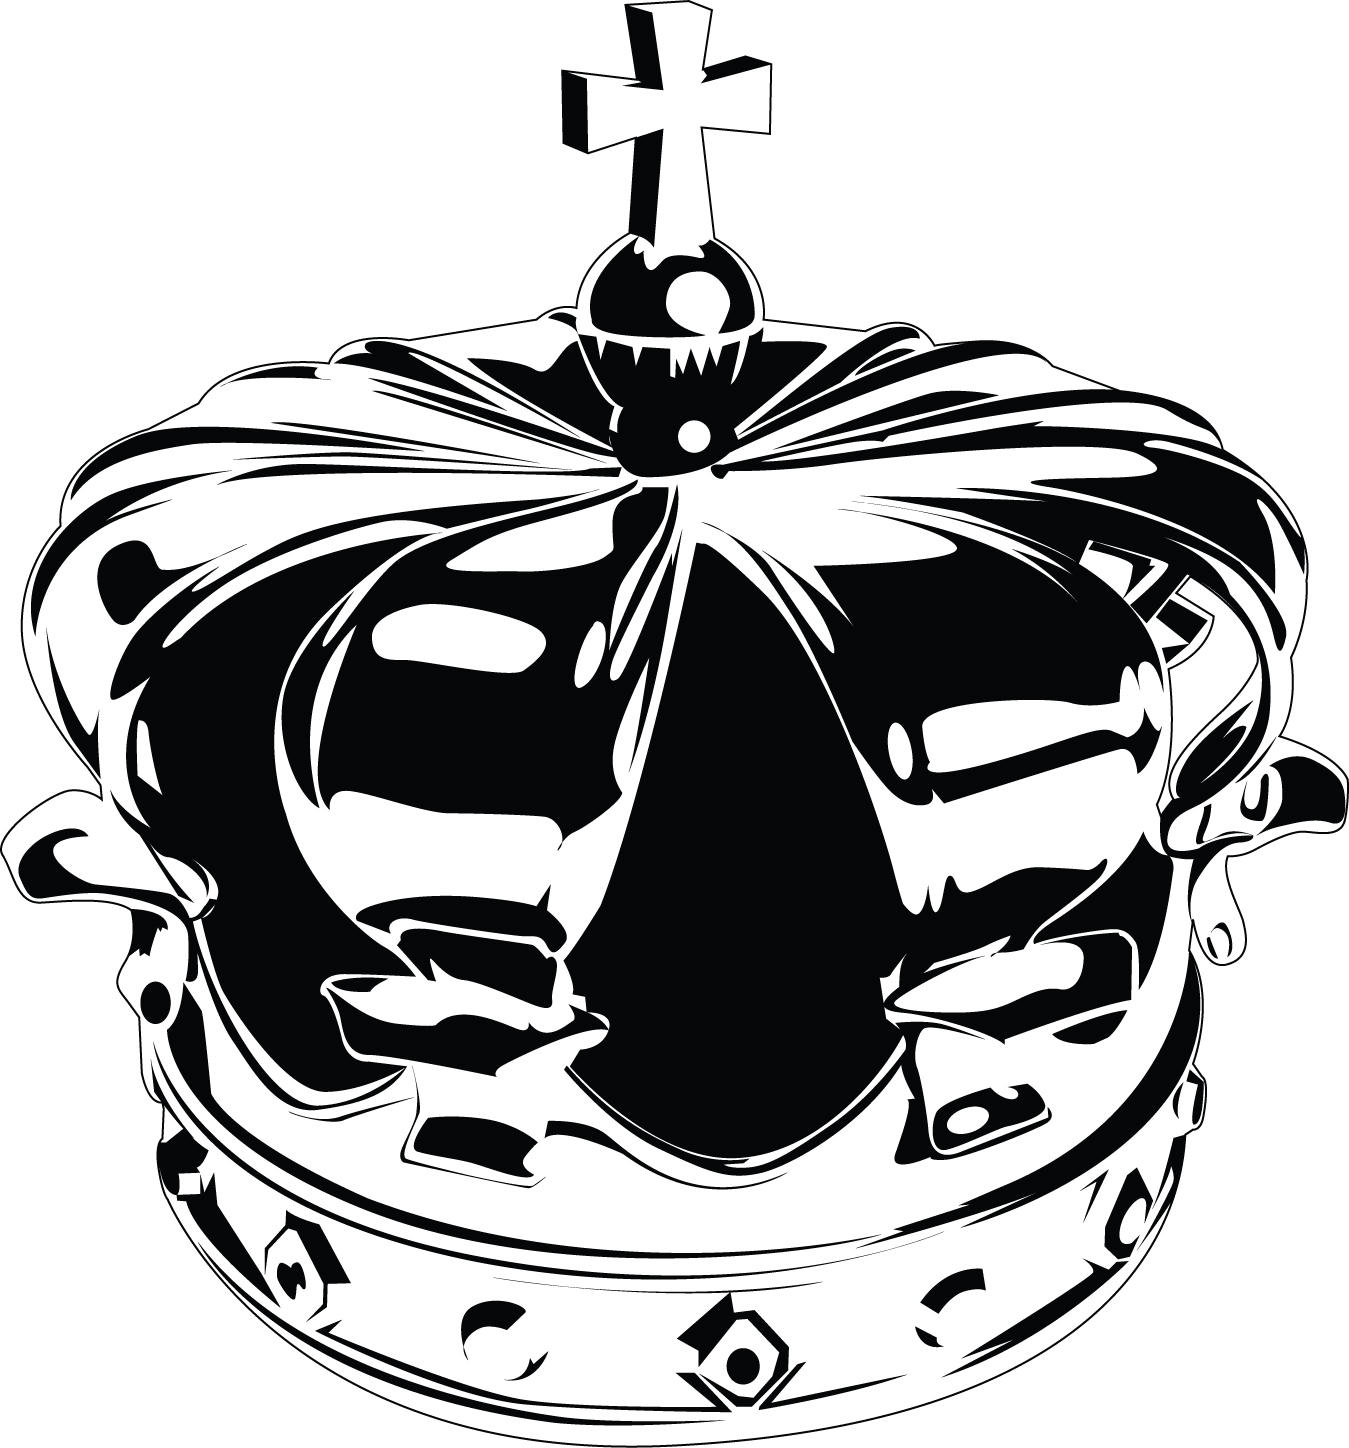 free vector clipart crown - photo #27